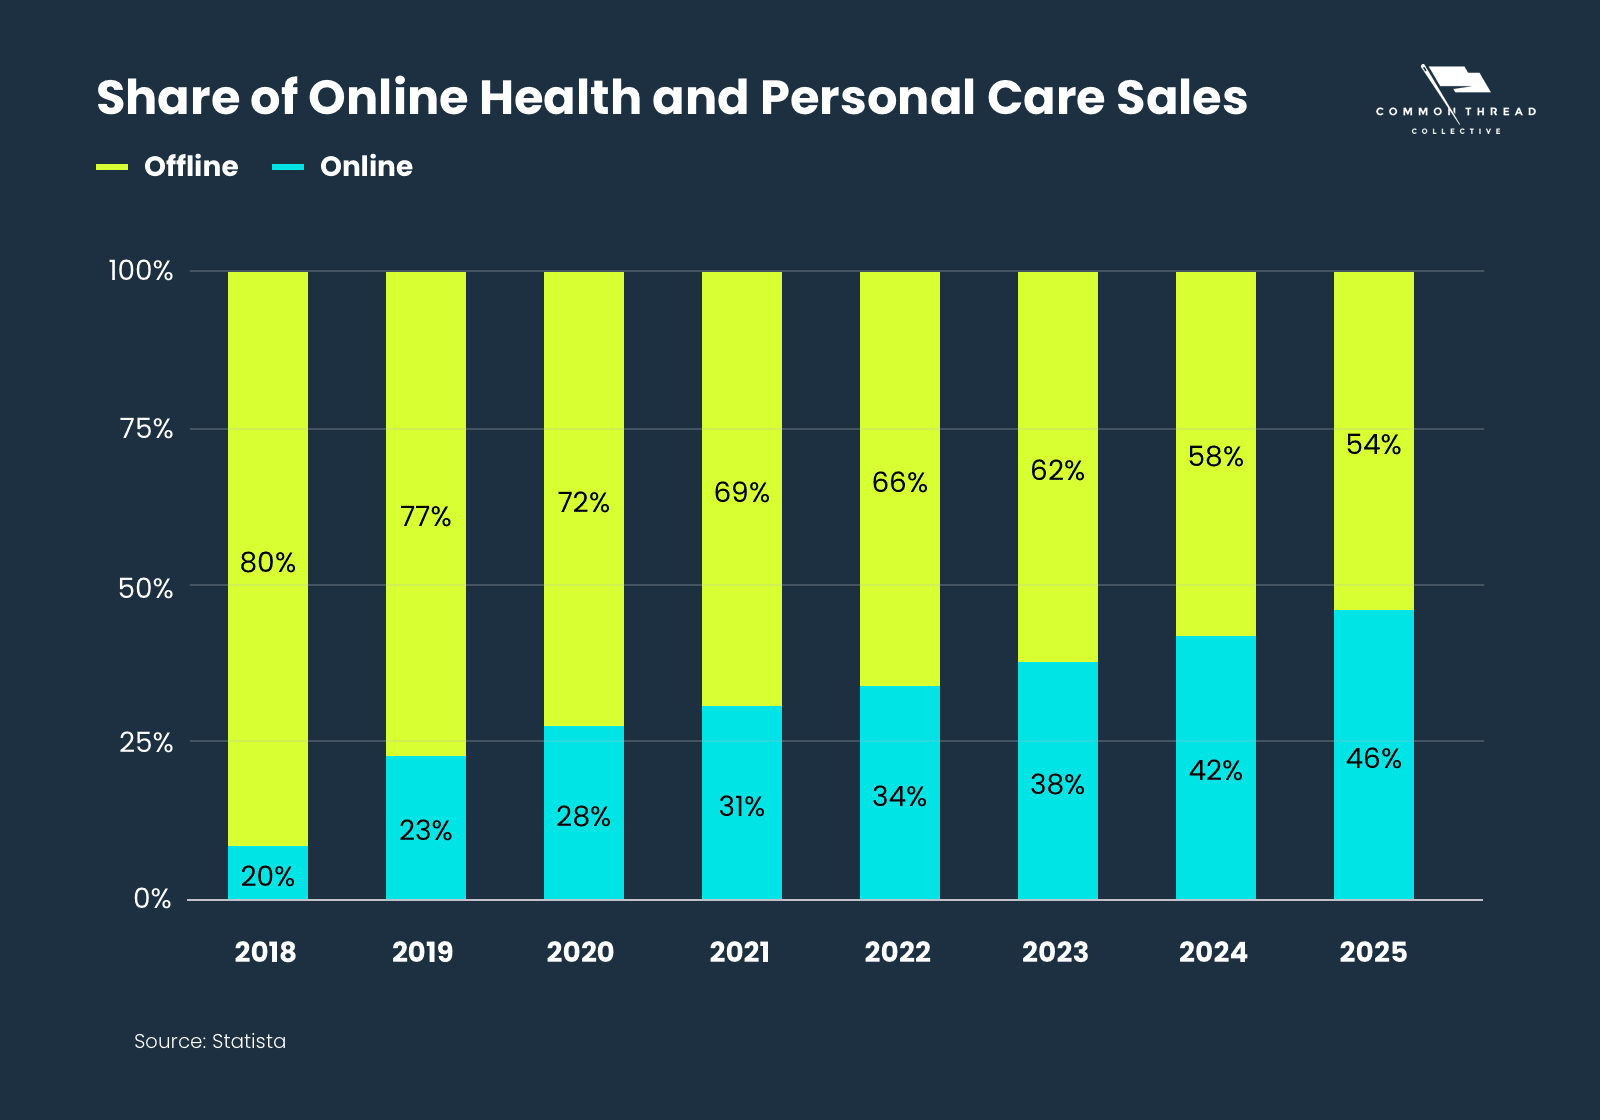 https://cdn.shopify.com/s/files/1/1024/1659/files/Share_Online_Health_Personal_Care_Sales_Statista.png?v=1669142748